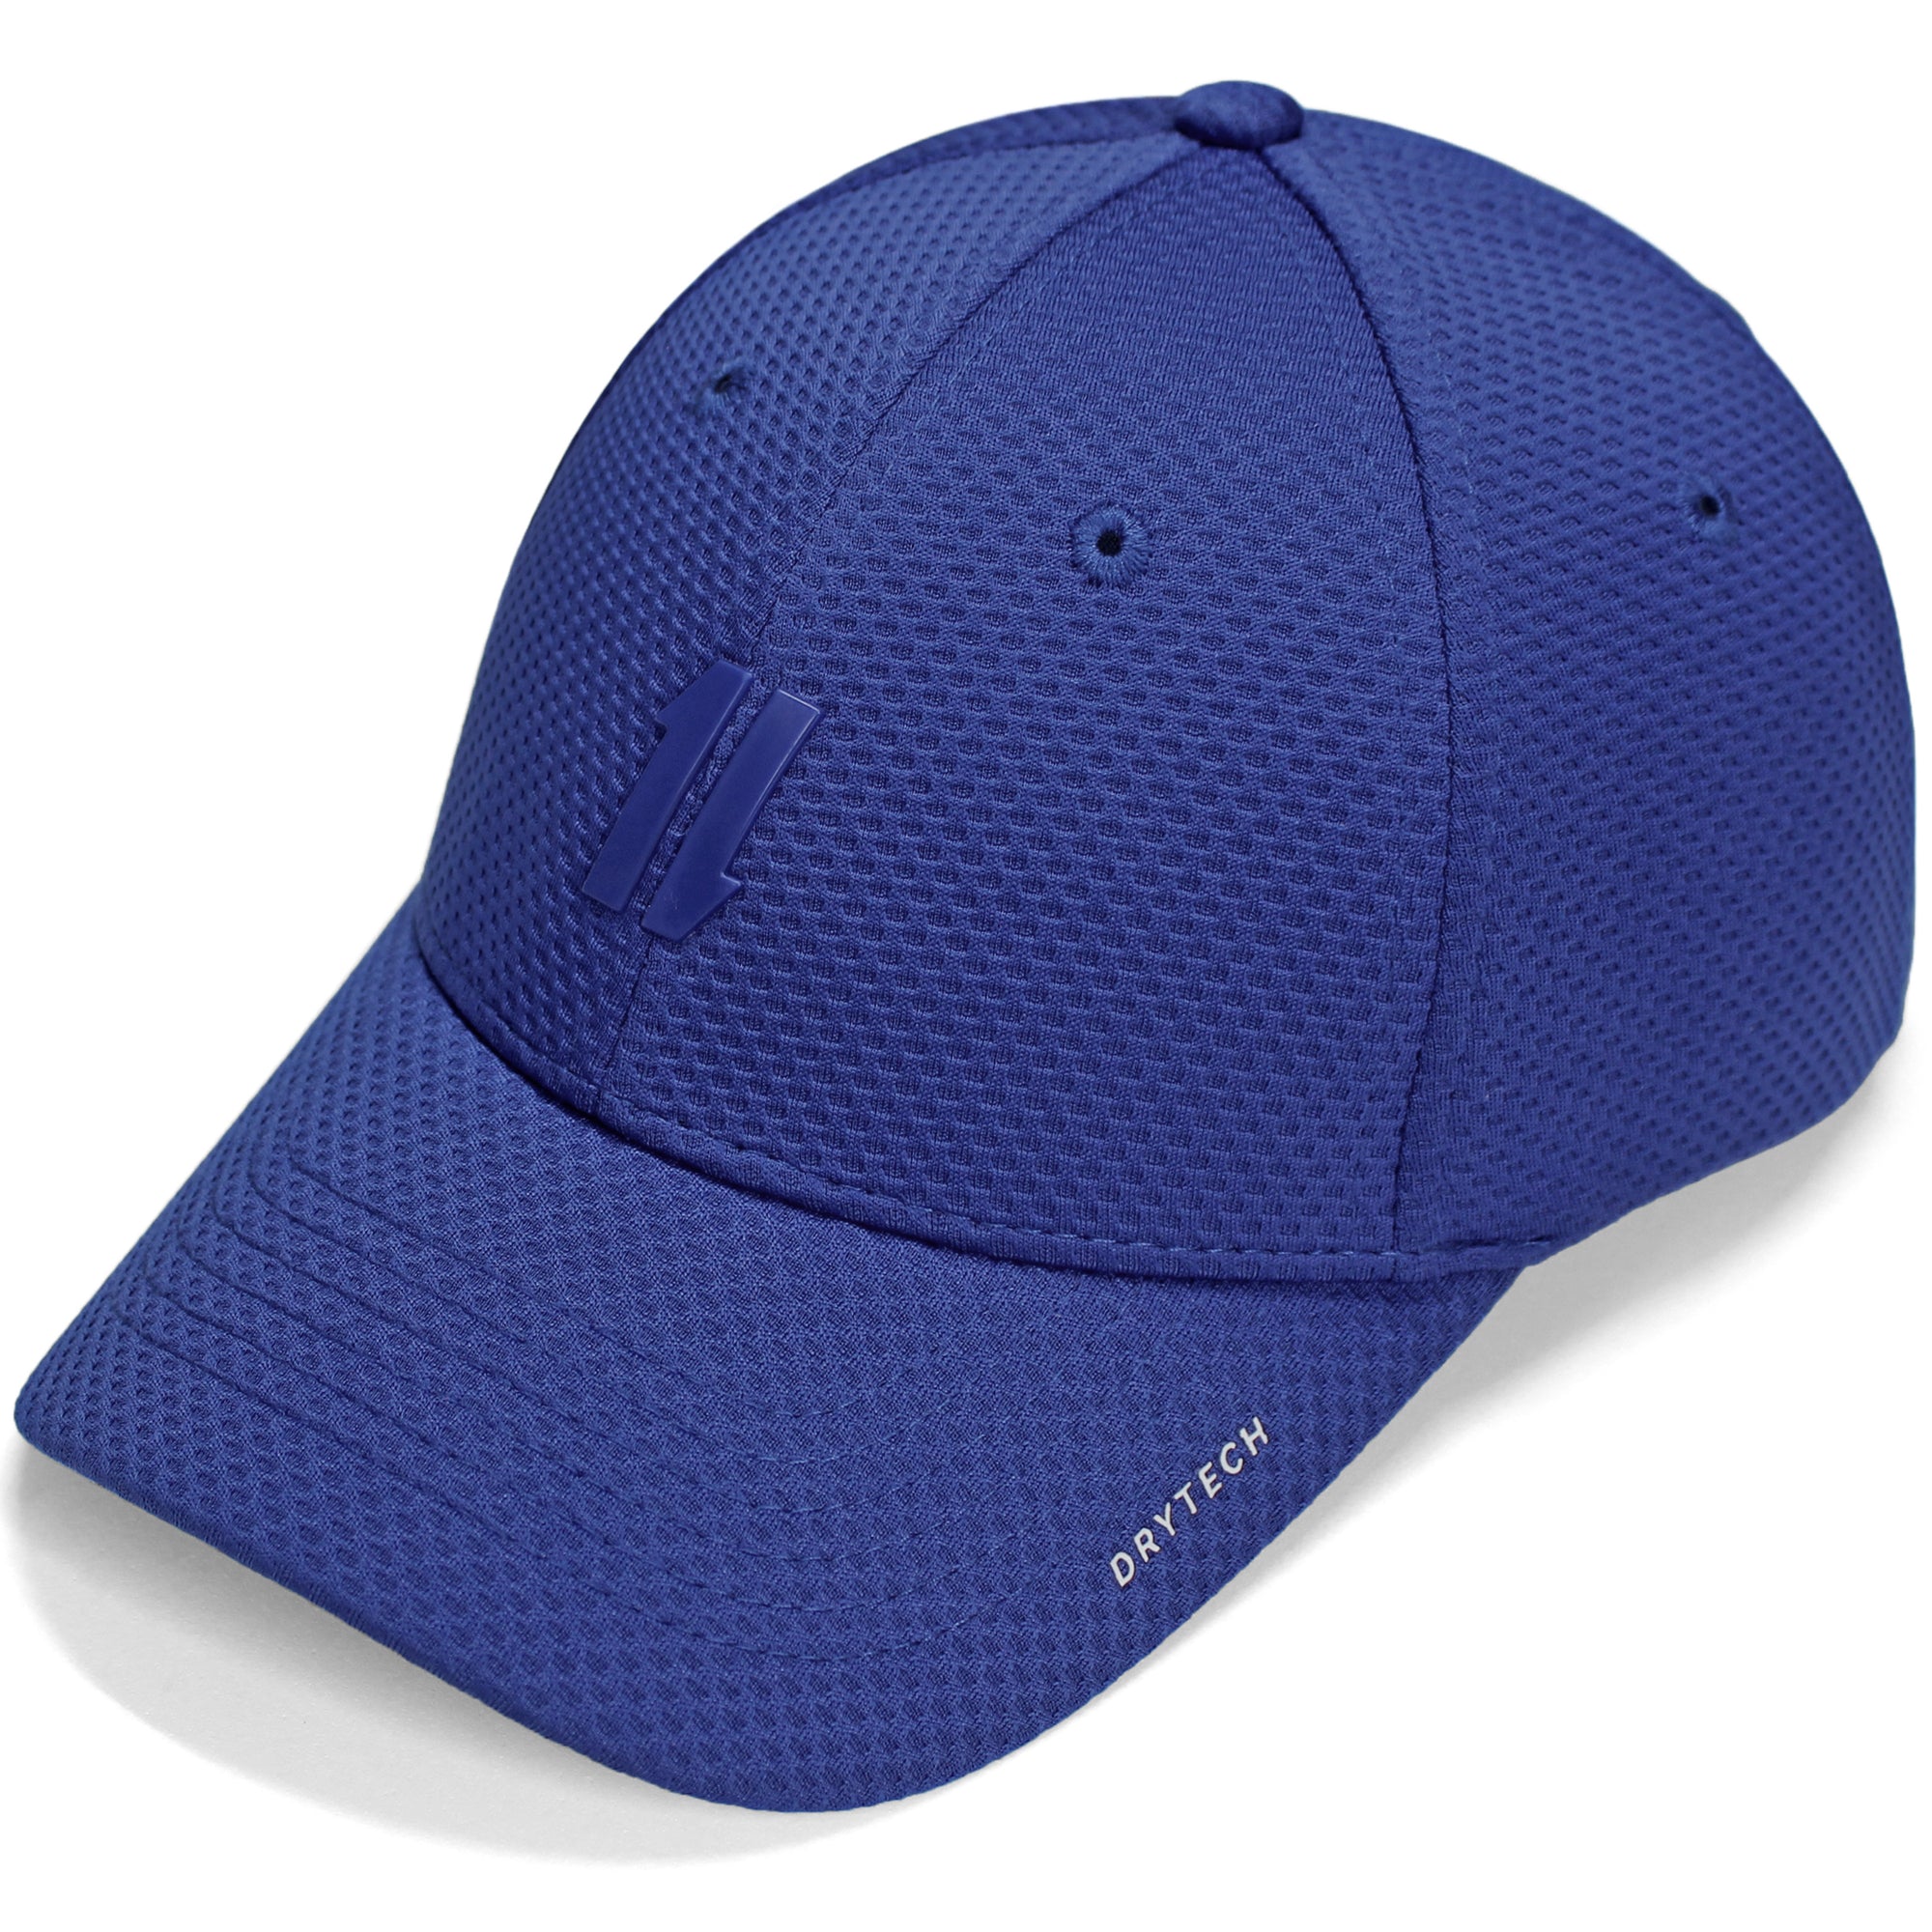 Mens Workout Hats & Athletic Hats by K&F  Shop Performance Gym Hats - King  and Fifth Supply Co.